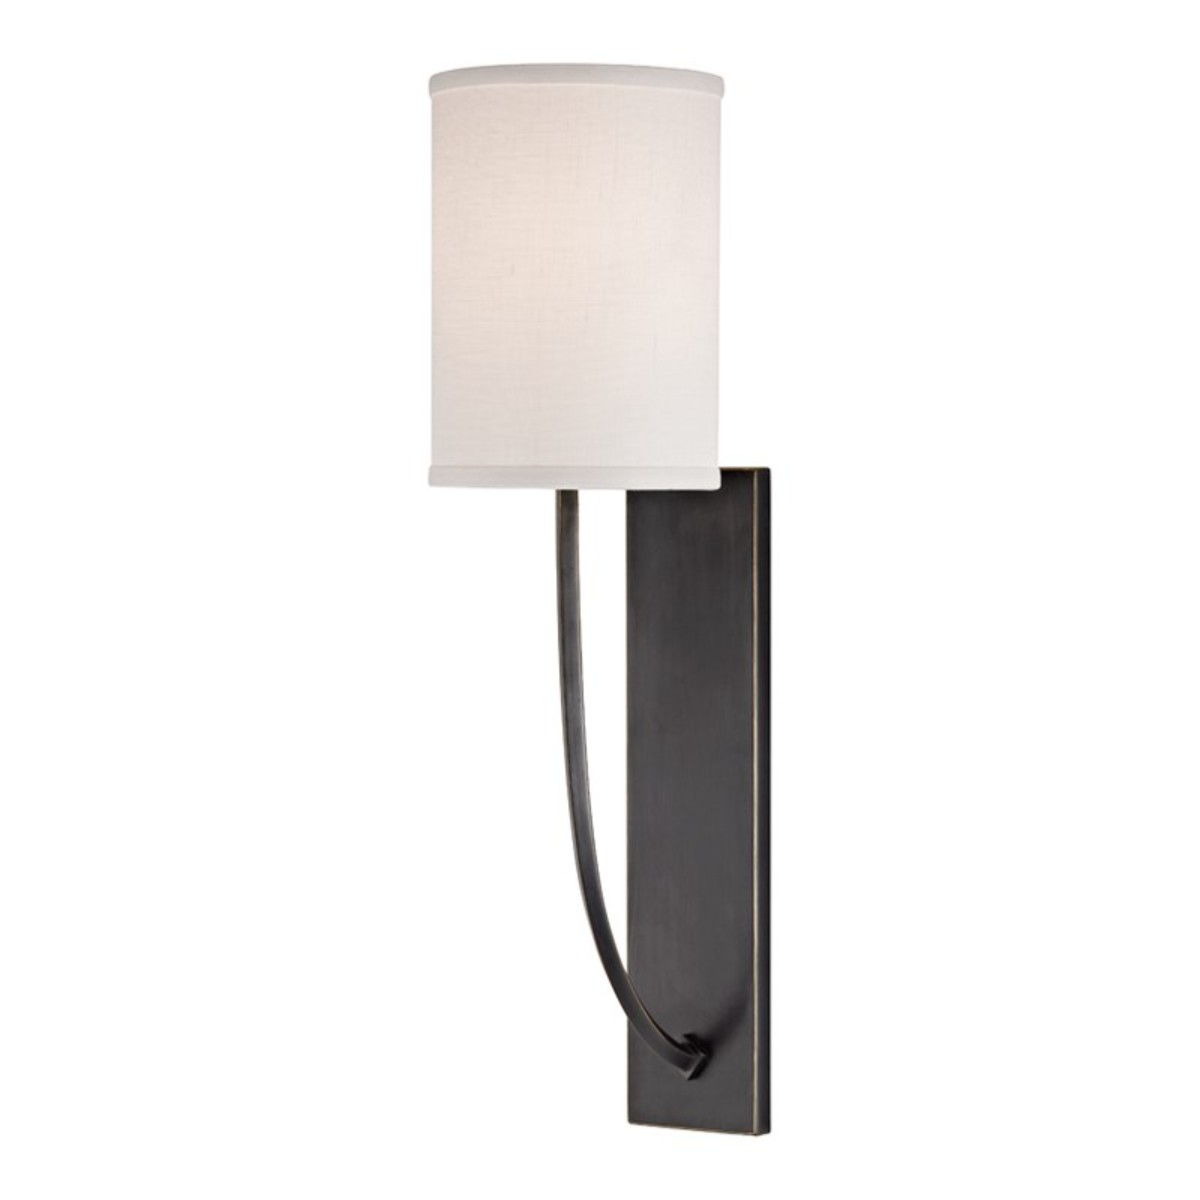 Hudson Valley | Colton Wall Light | Old Bronze